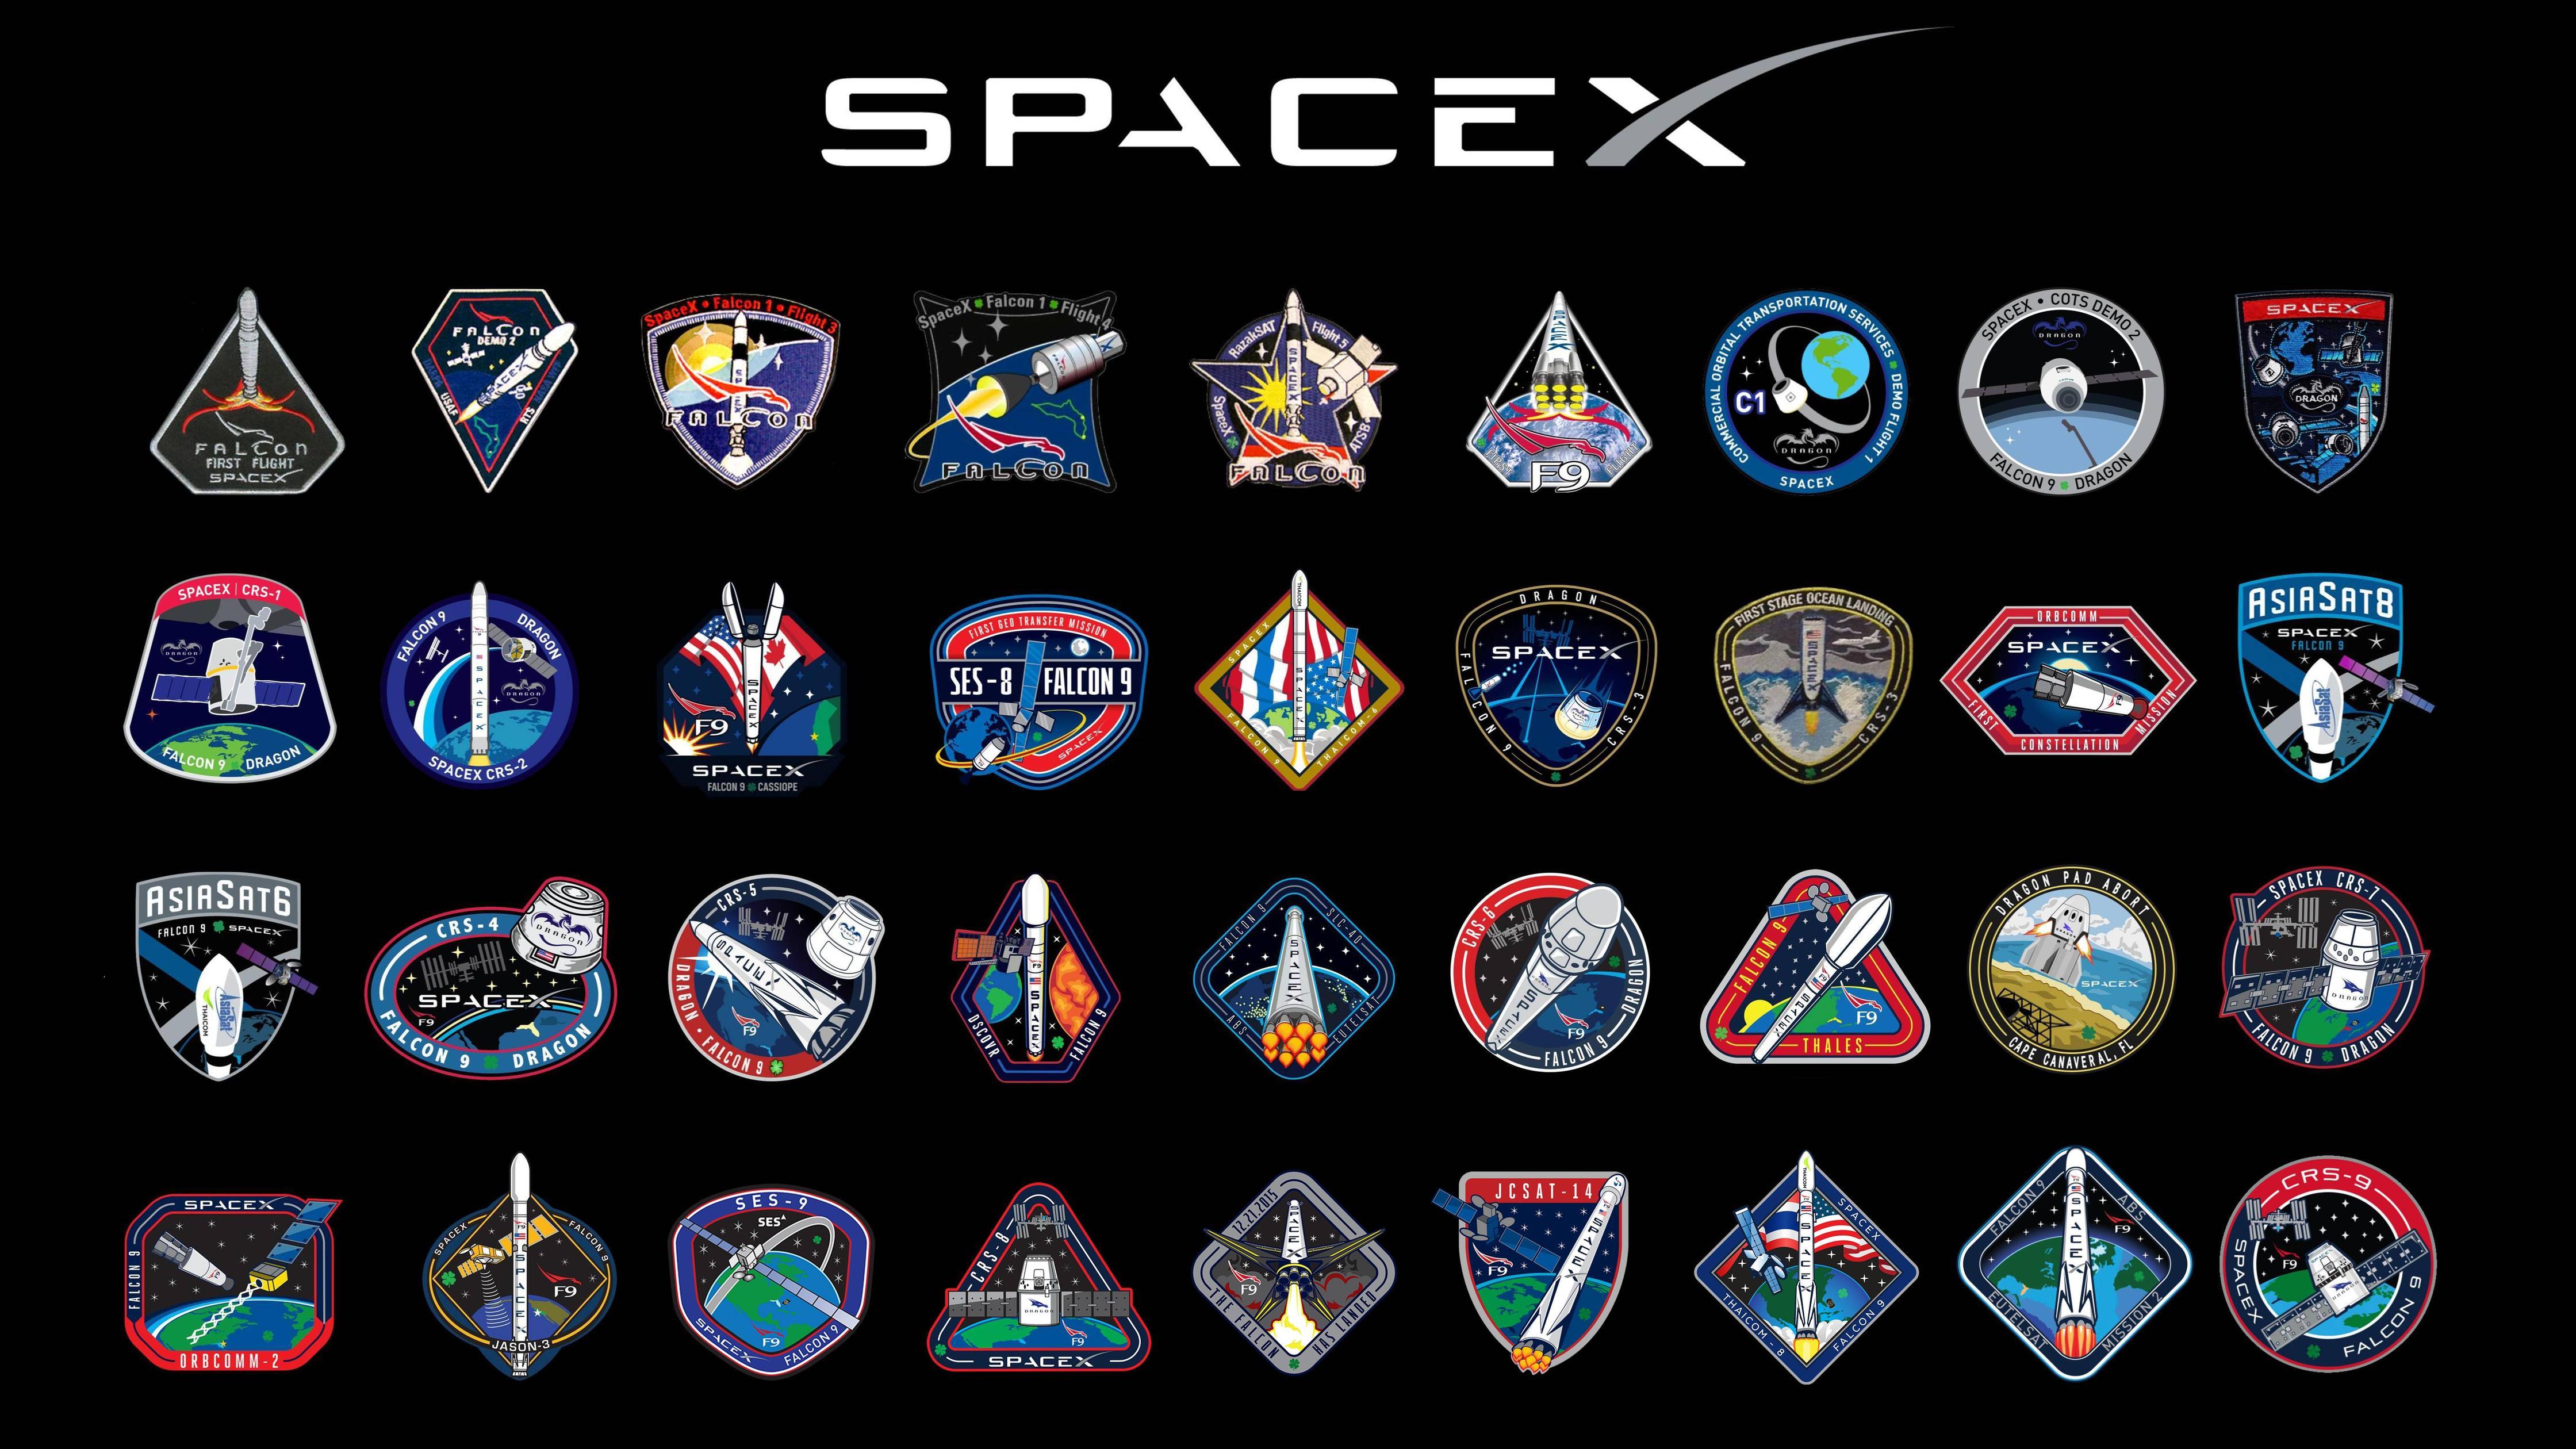 SpaceX Mission Patch 16:9 Wallpaper